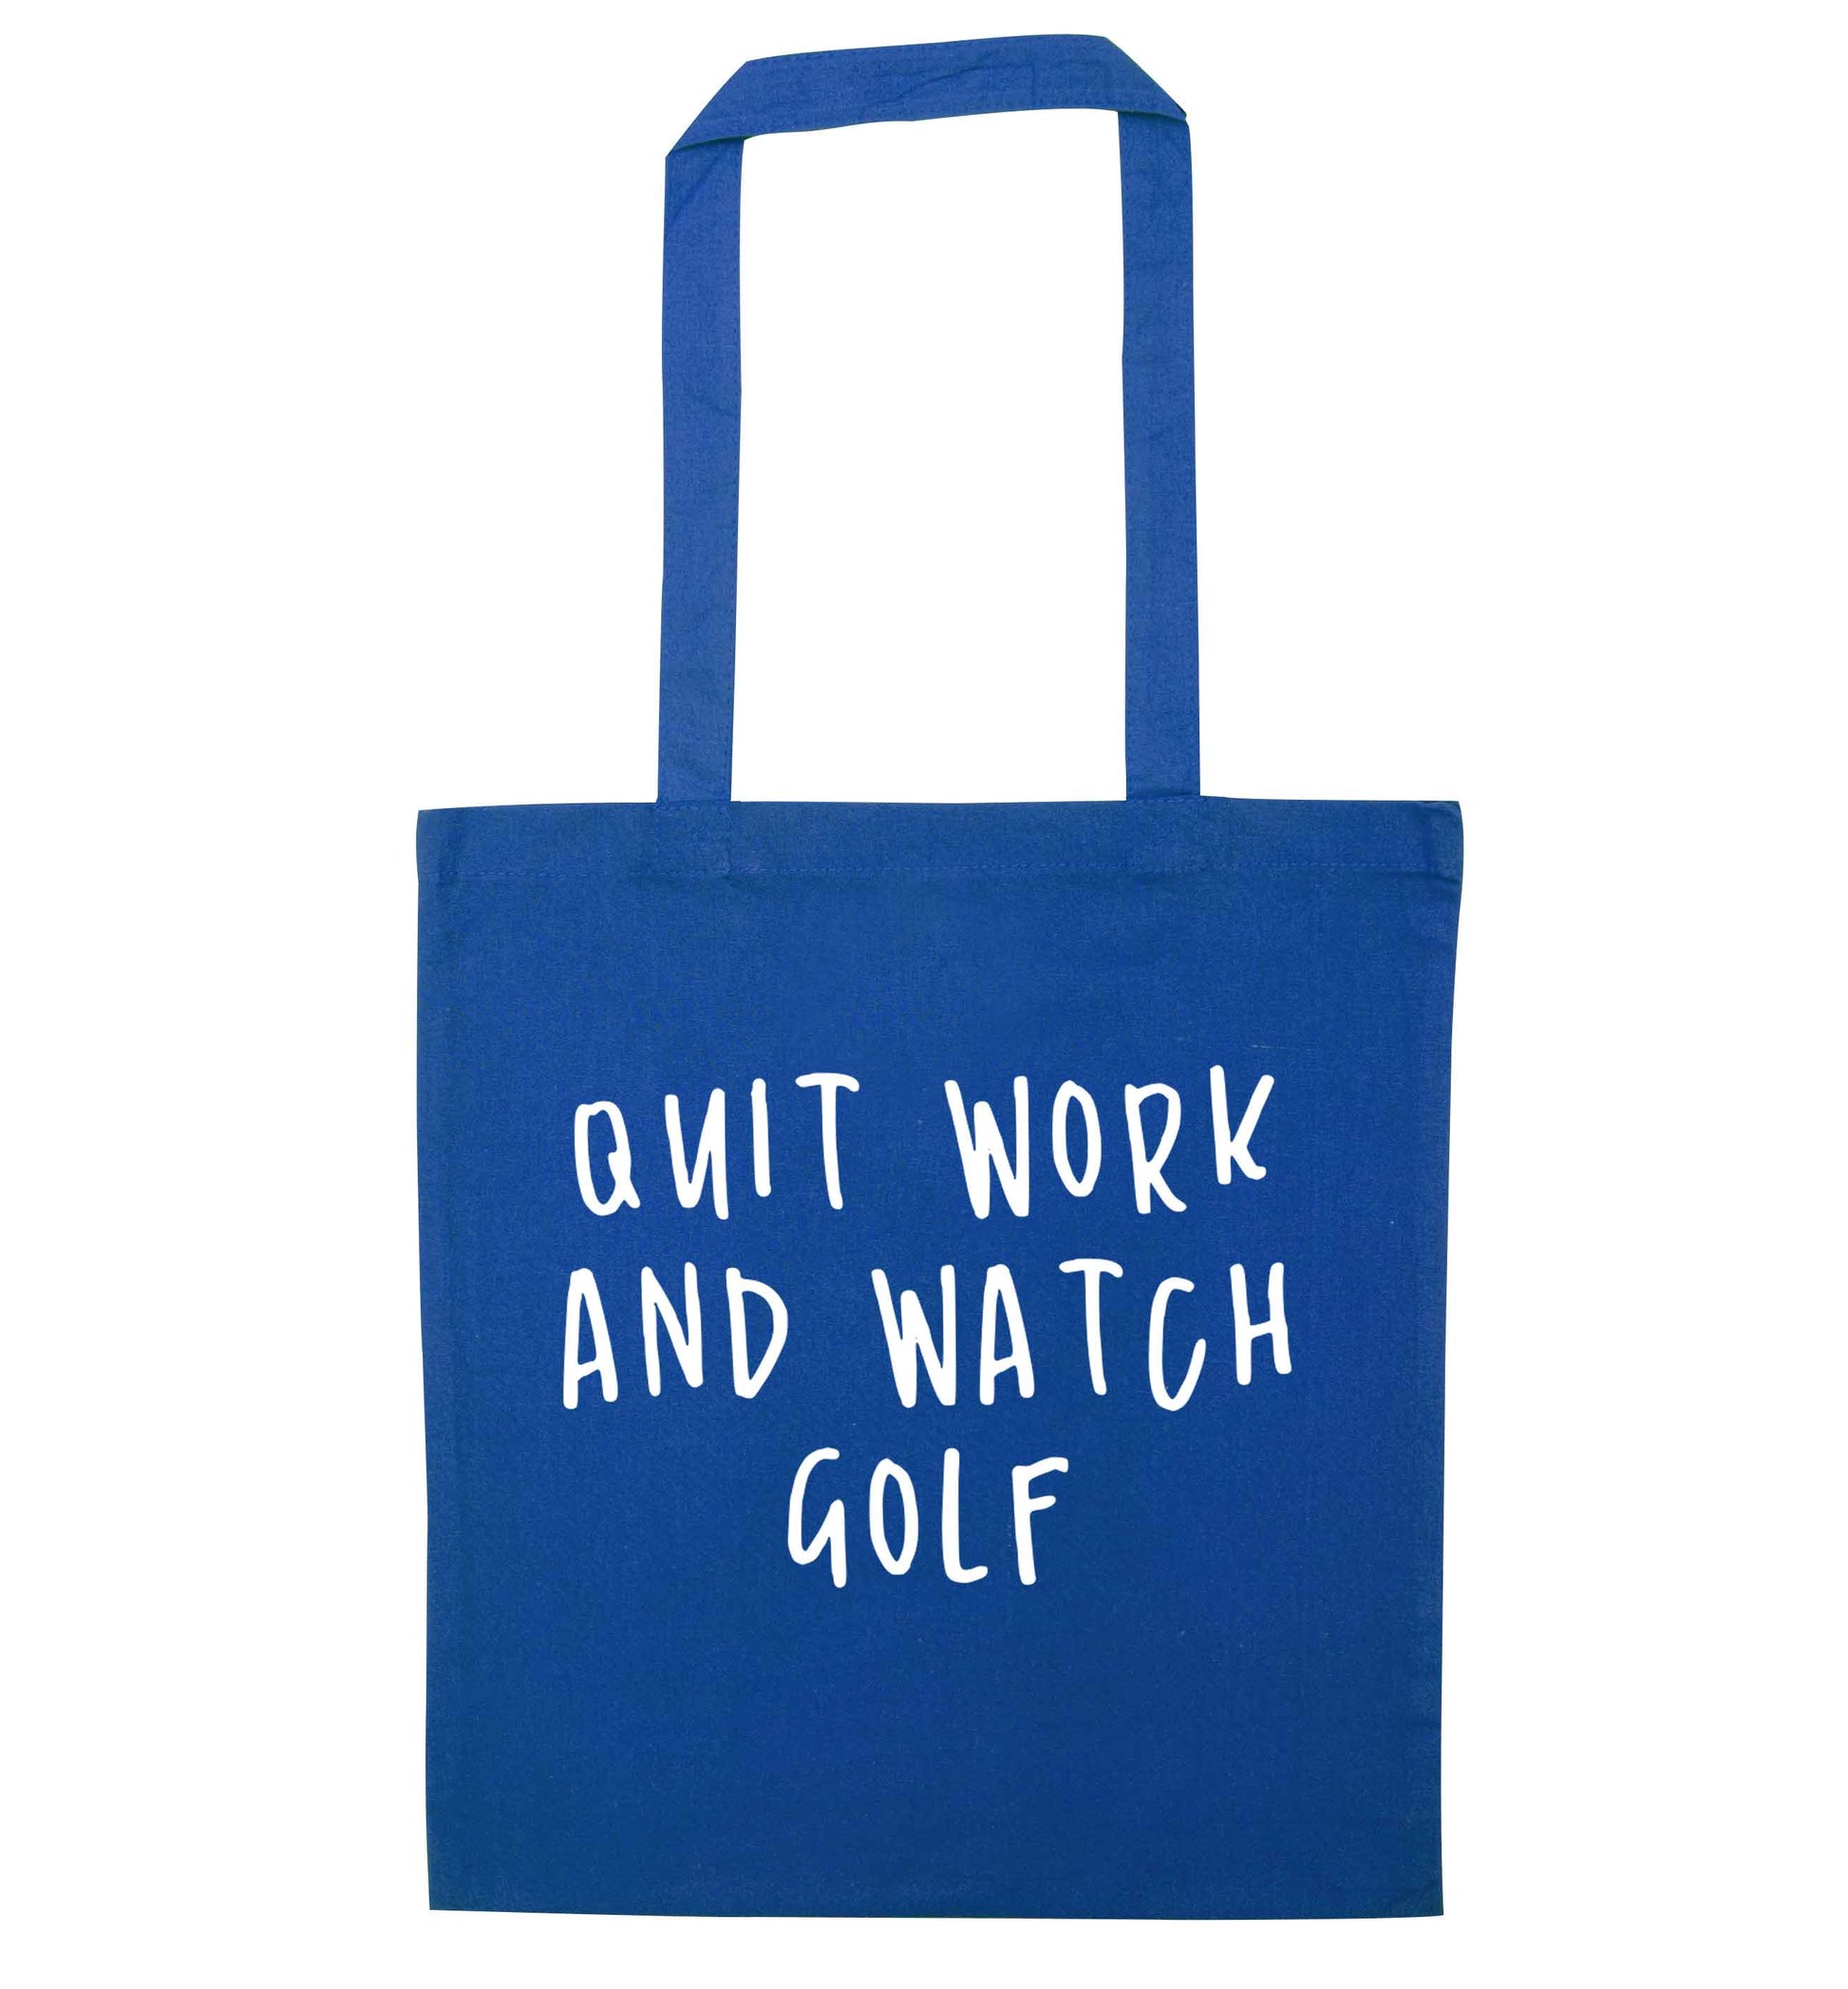 Quit work and watch golf blue tote bag